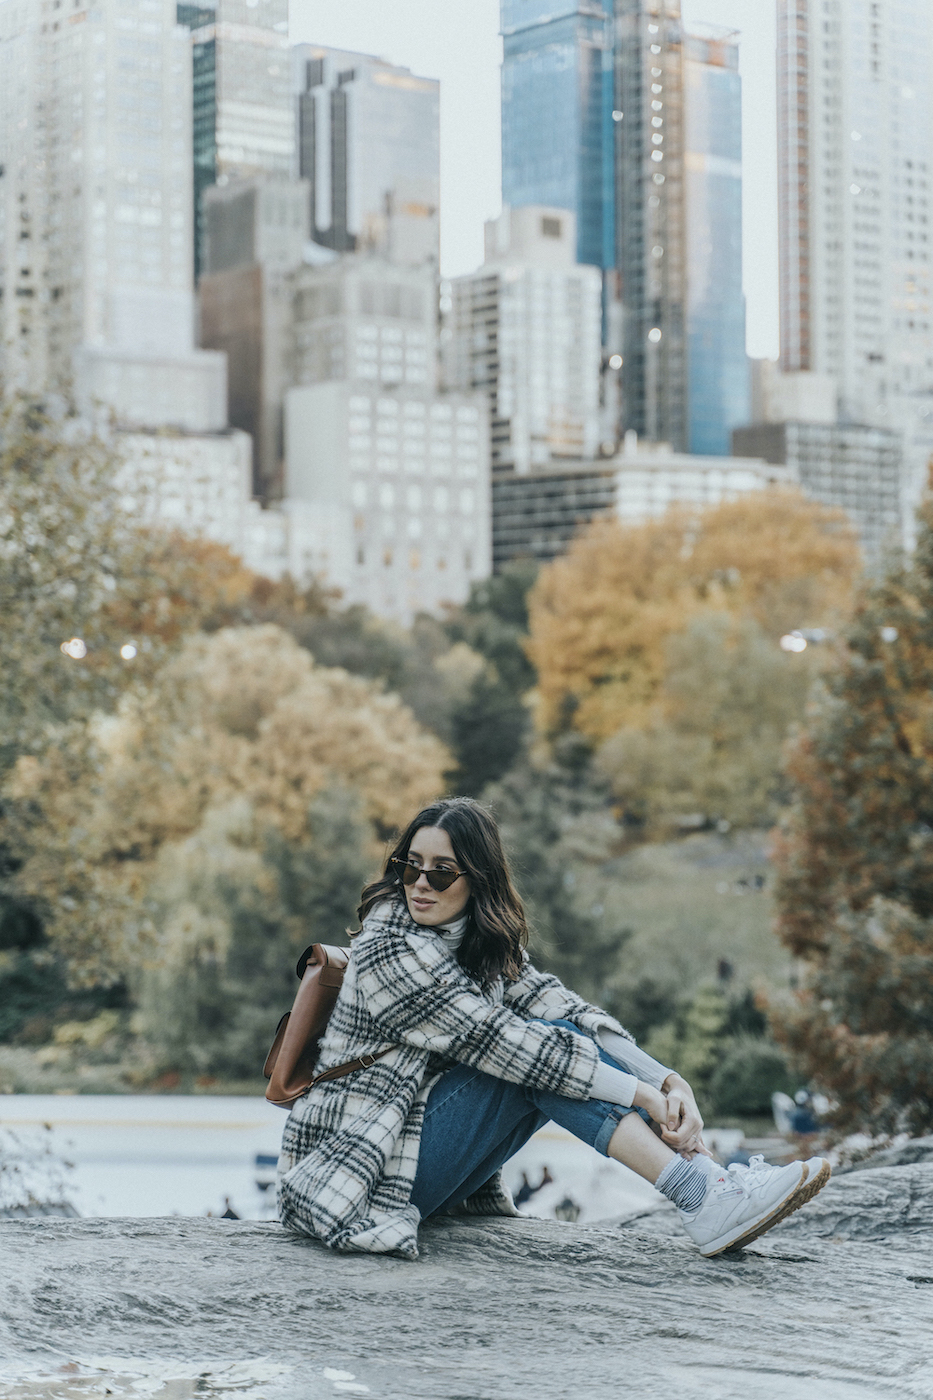 My days in the Big Apple – Where to stay and where to eat!